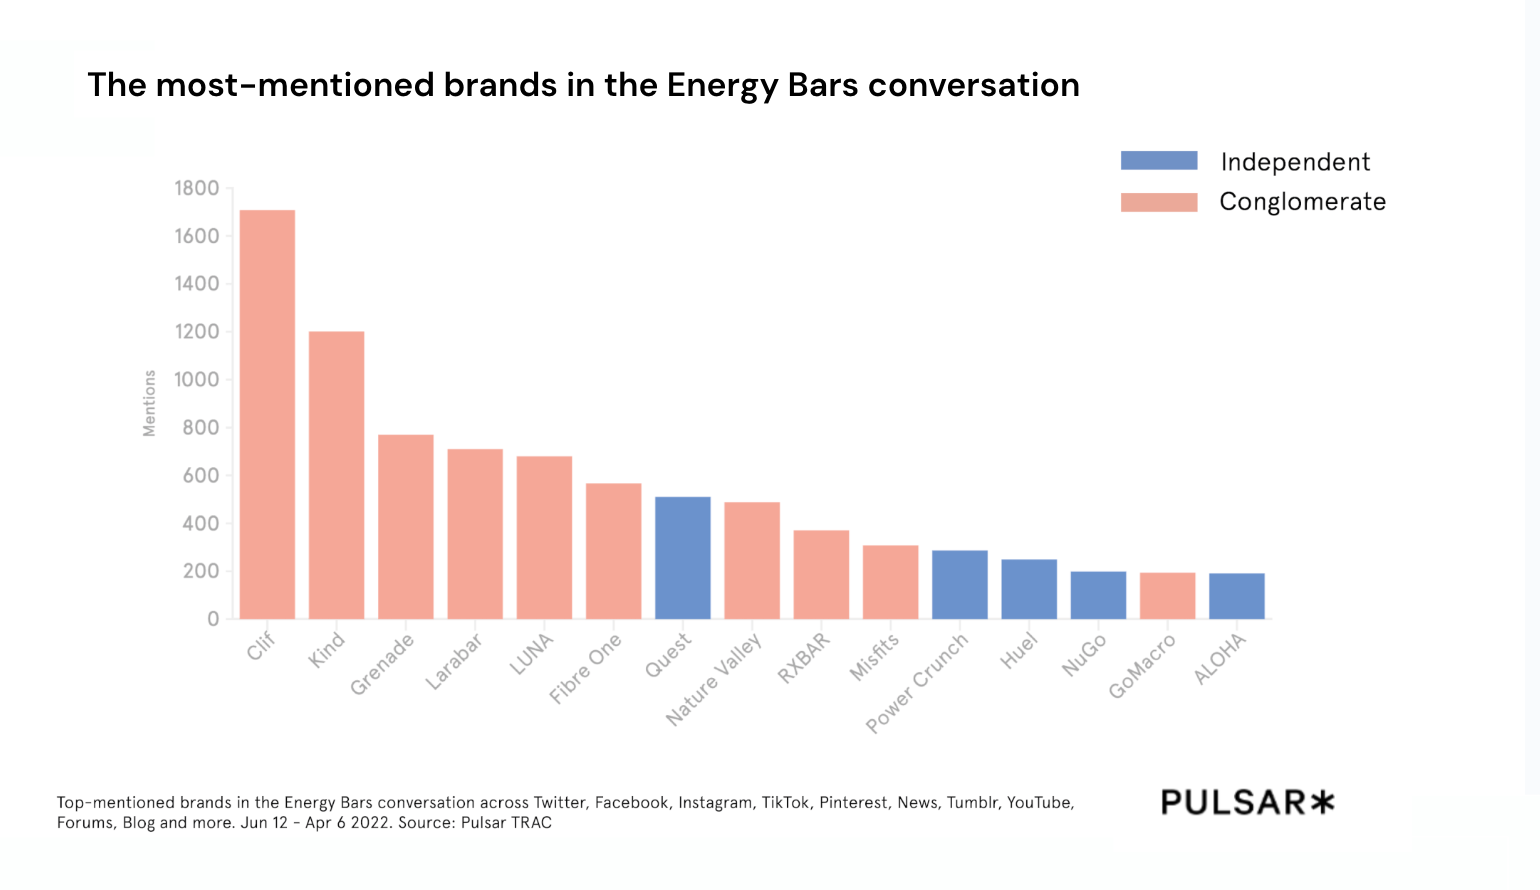 The most-mentioned brands in the Energy Bars conversation